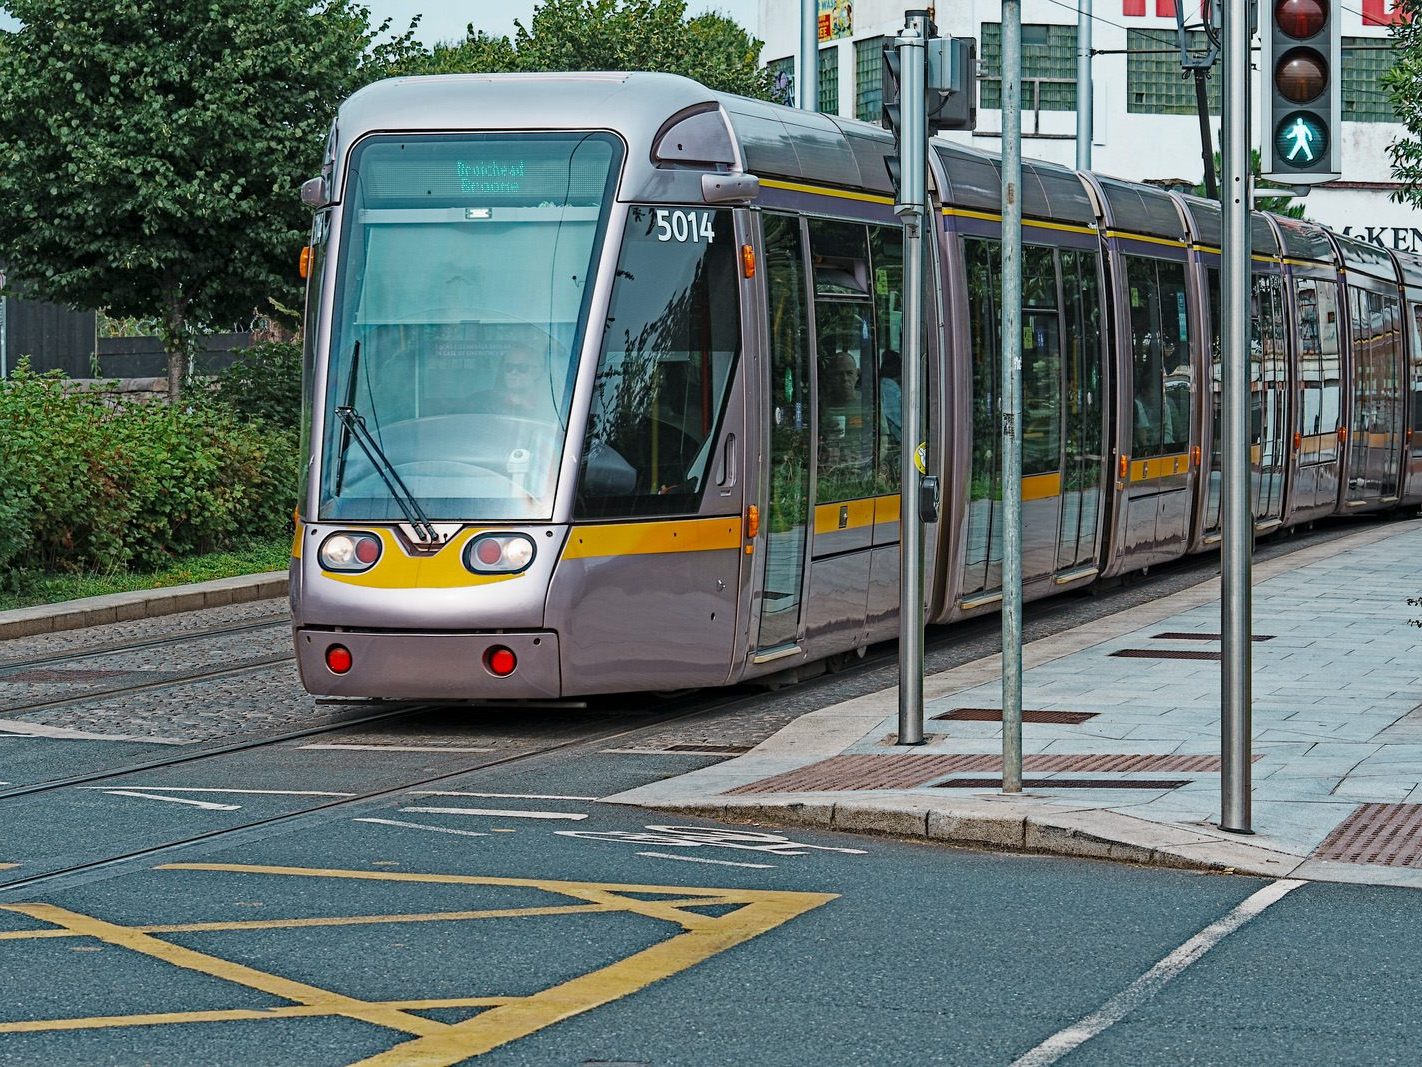 PUBLIC TRANSPORT AT BROADSTONE [RANDOM IMAGES OF LUAS TRAMS ARRIVING AND LEAVING] 016